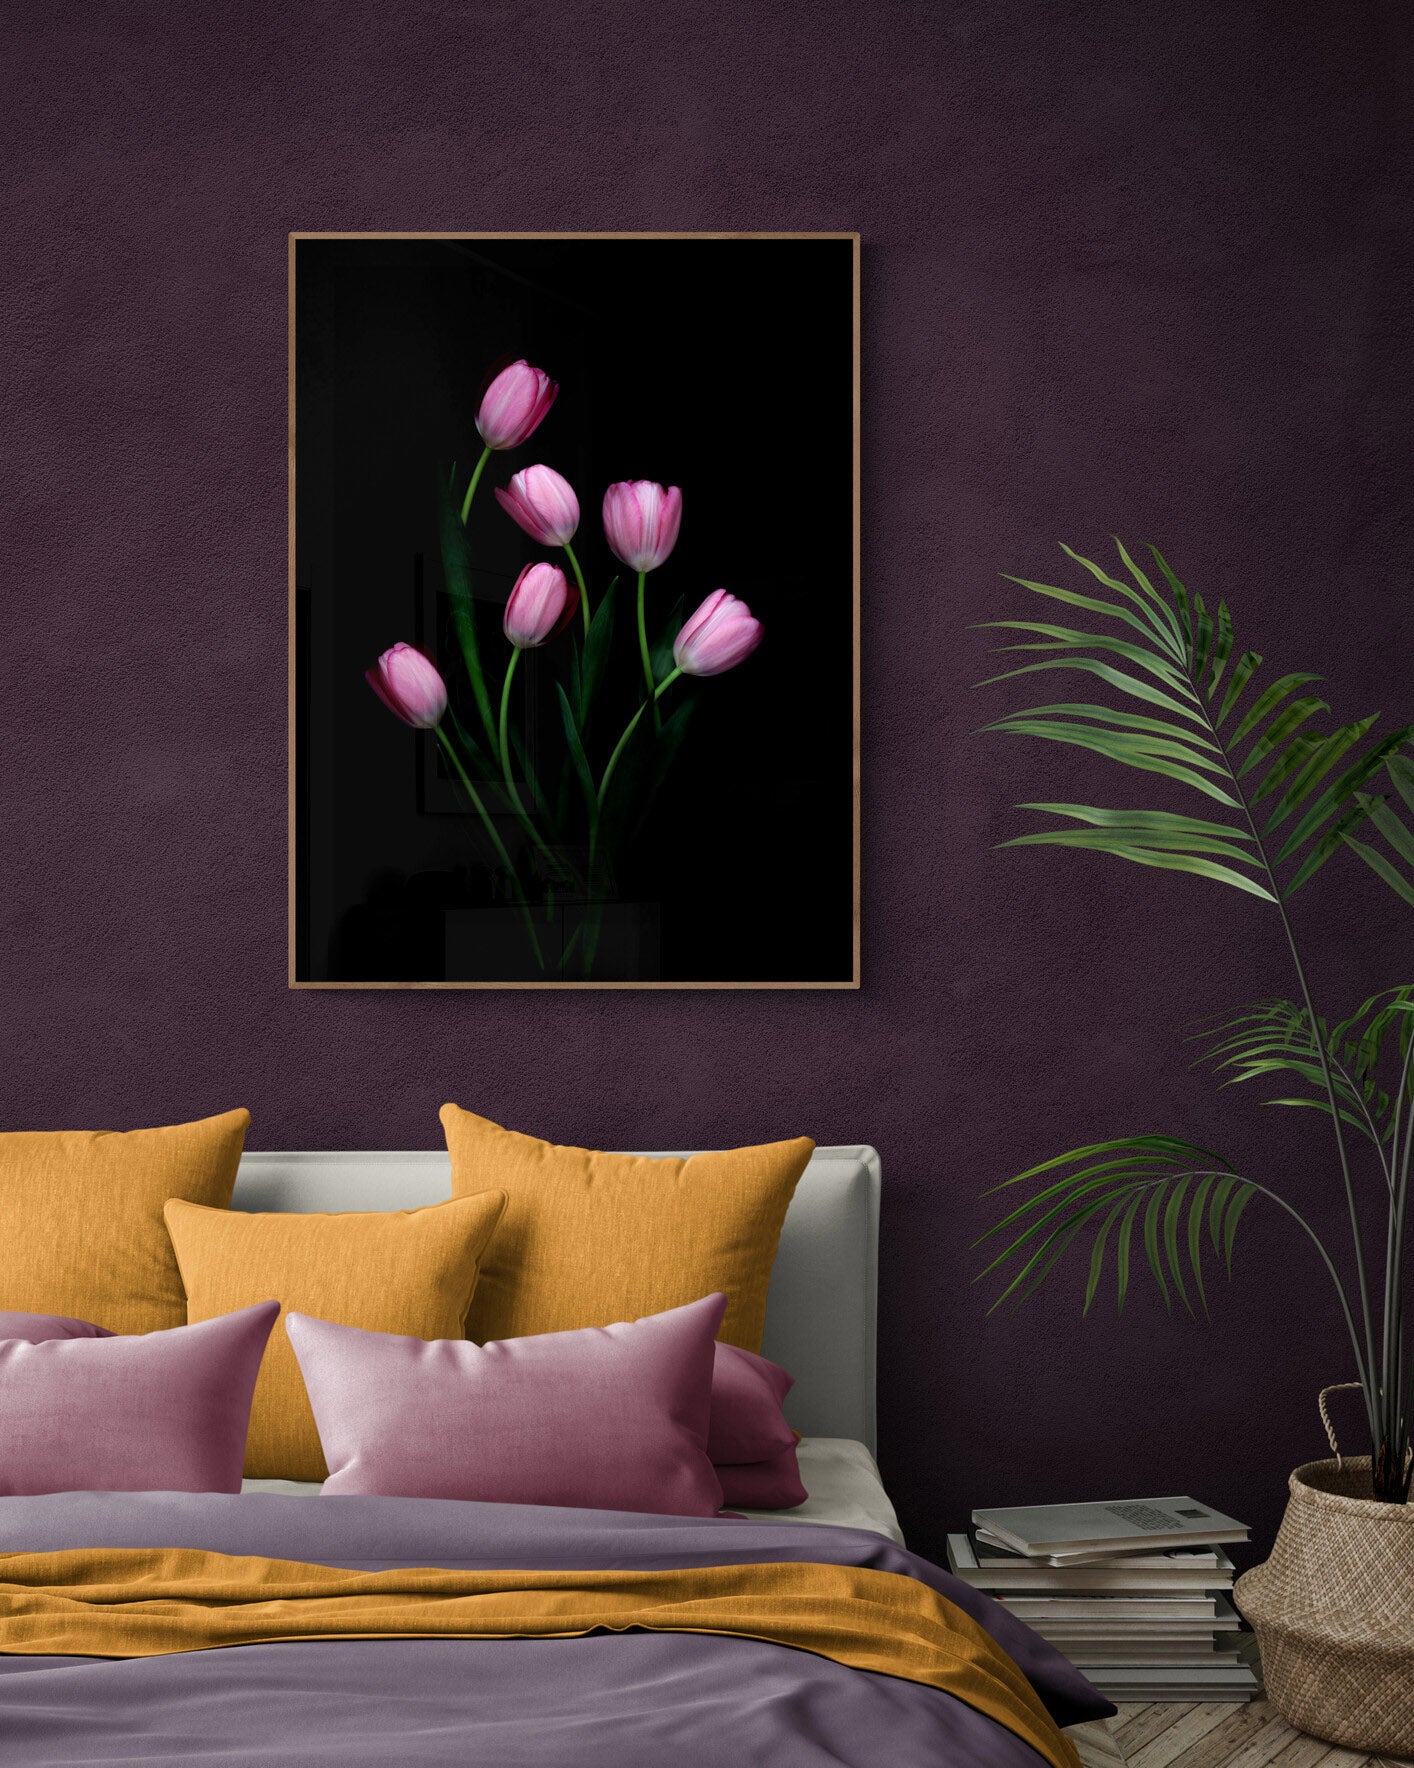 Botanical print of Pink Tulips on a black background, framed on a dark wall.